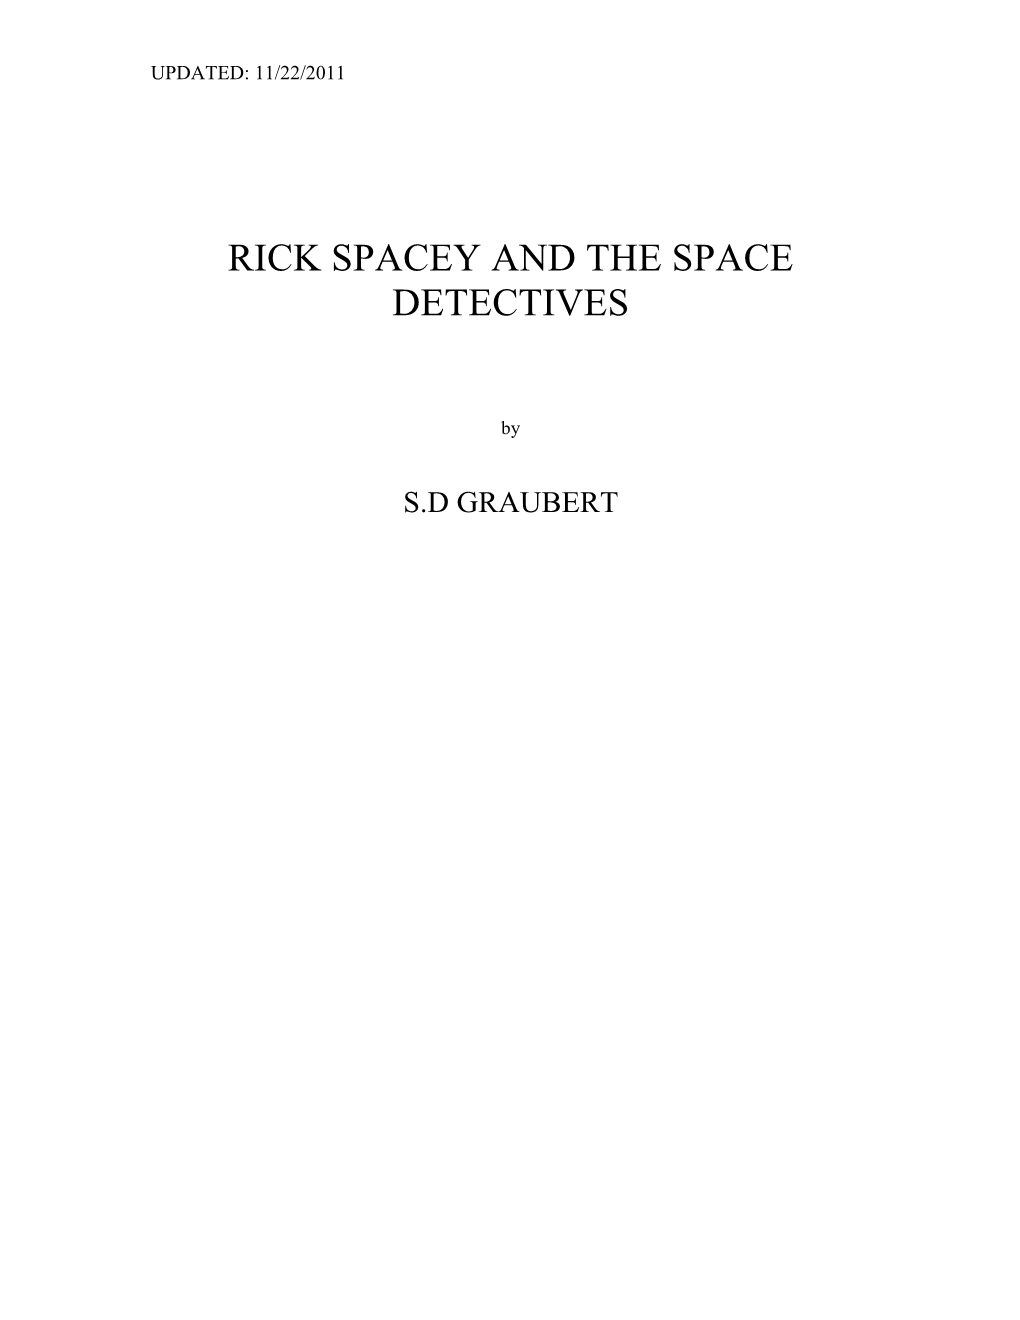 Rick Spacey and the Space Detectives